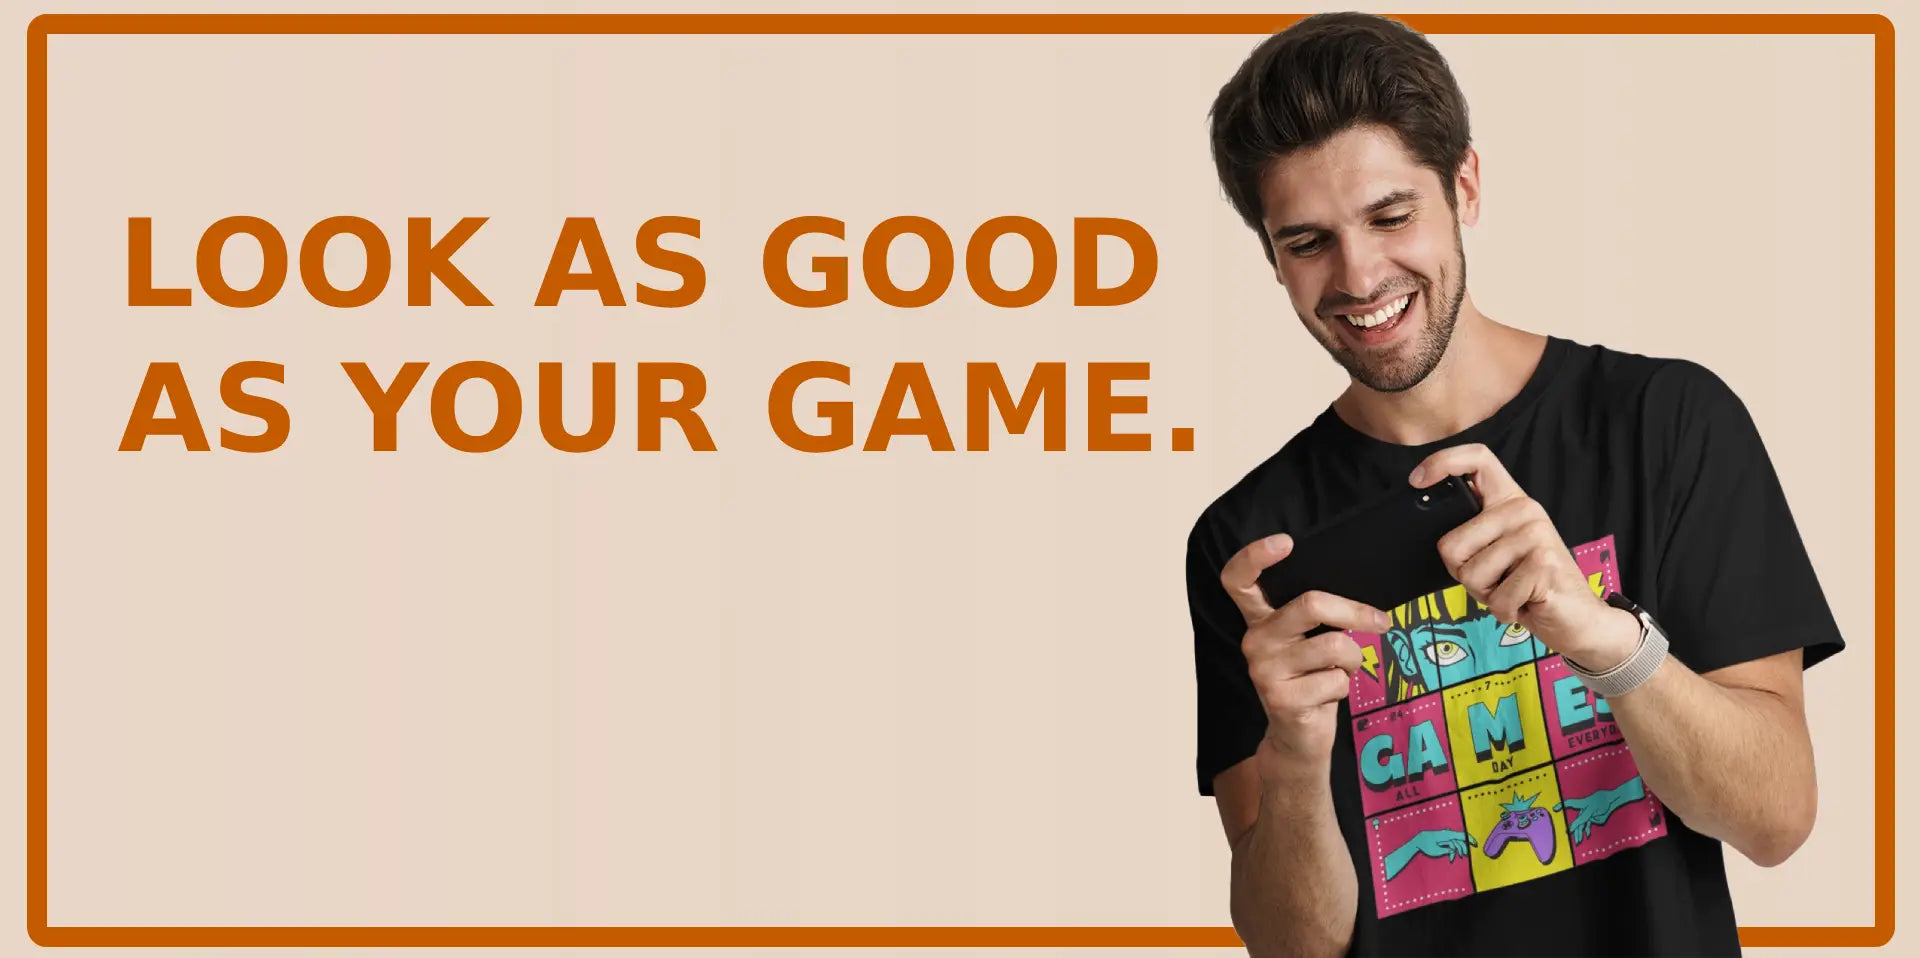 Shop Gaming Merch at Game Culture Company - Your Game. Your Style.